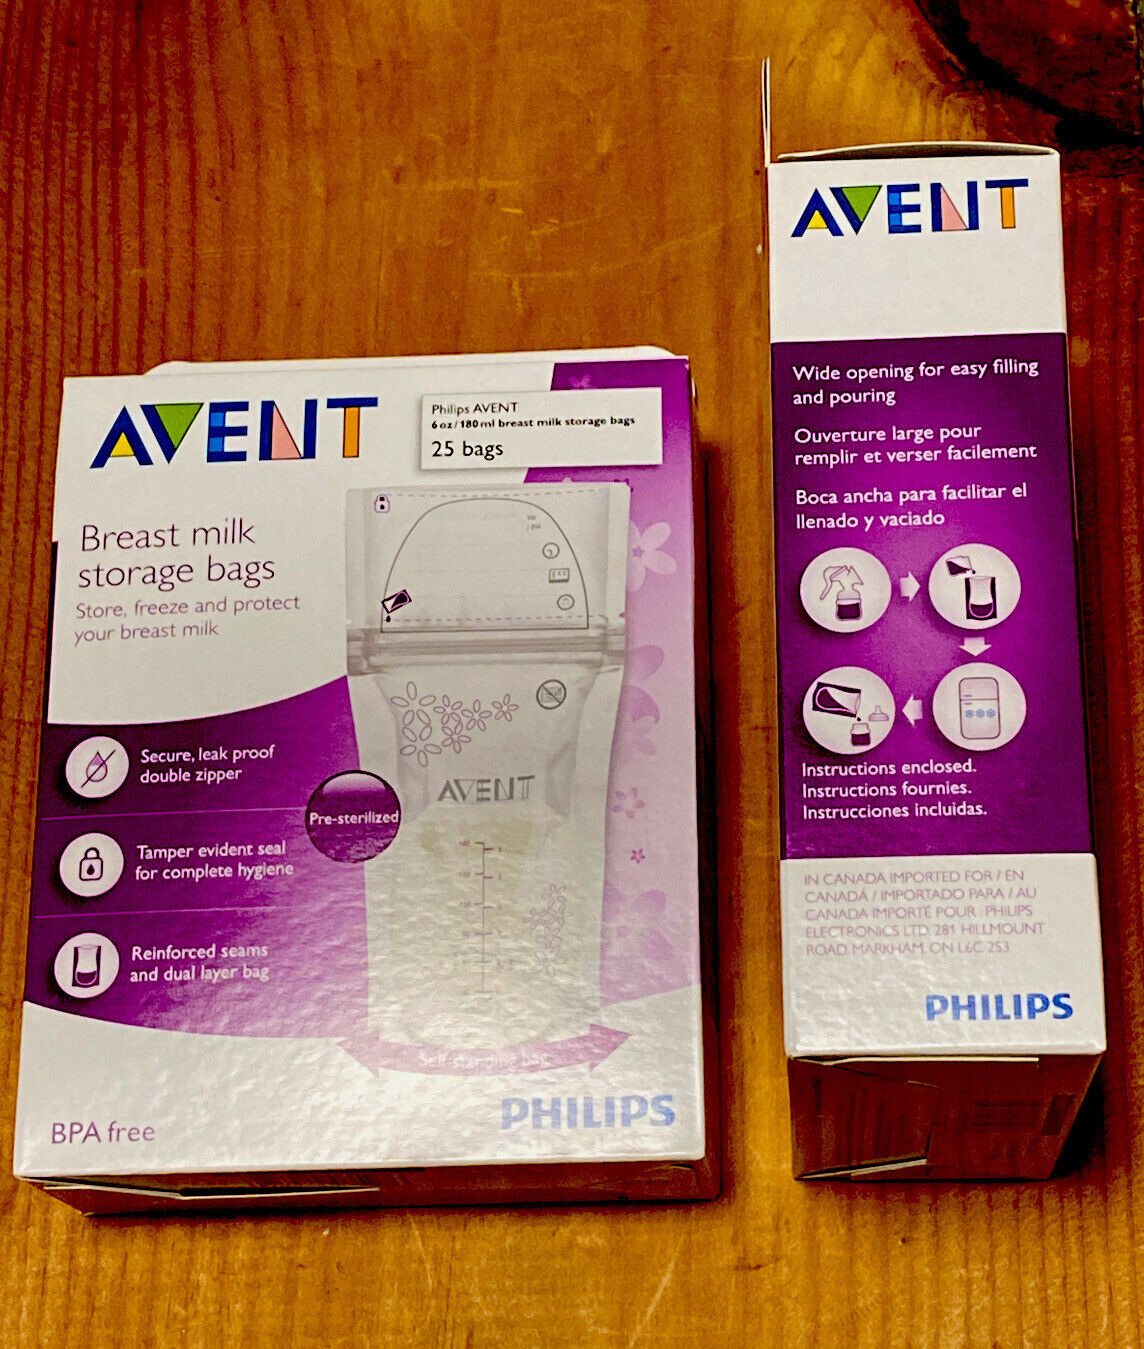 Philips AVENT Breast Milk Storage Bags, 6 Ounce, 25 Count - pack of 2.